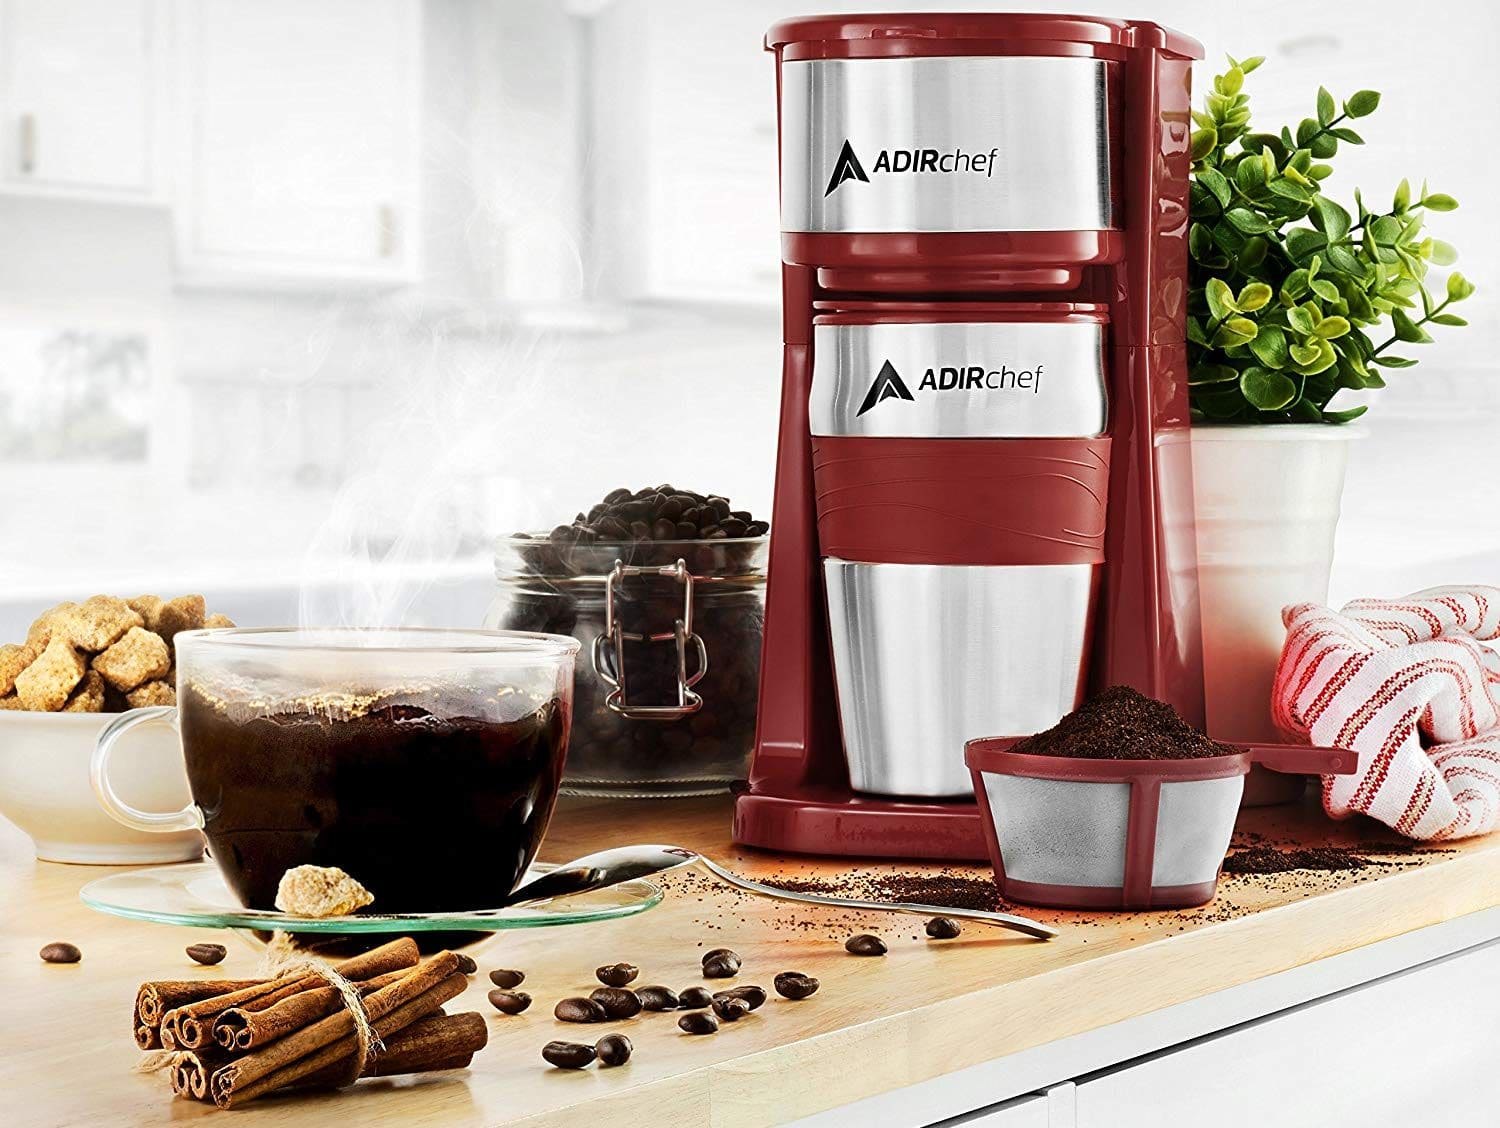 5 Handiest Single-Serve Coffee Makers Which Use No Pods — Save Your Money on Costly Capsules!